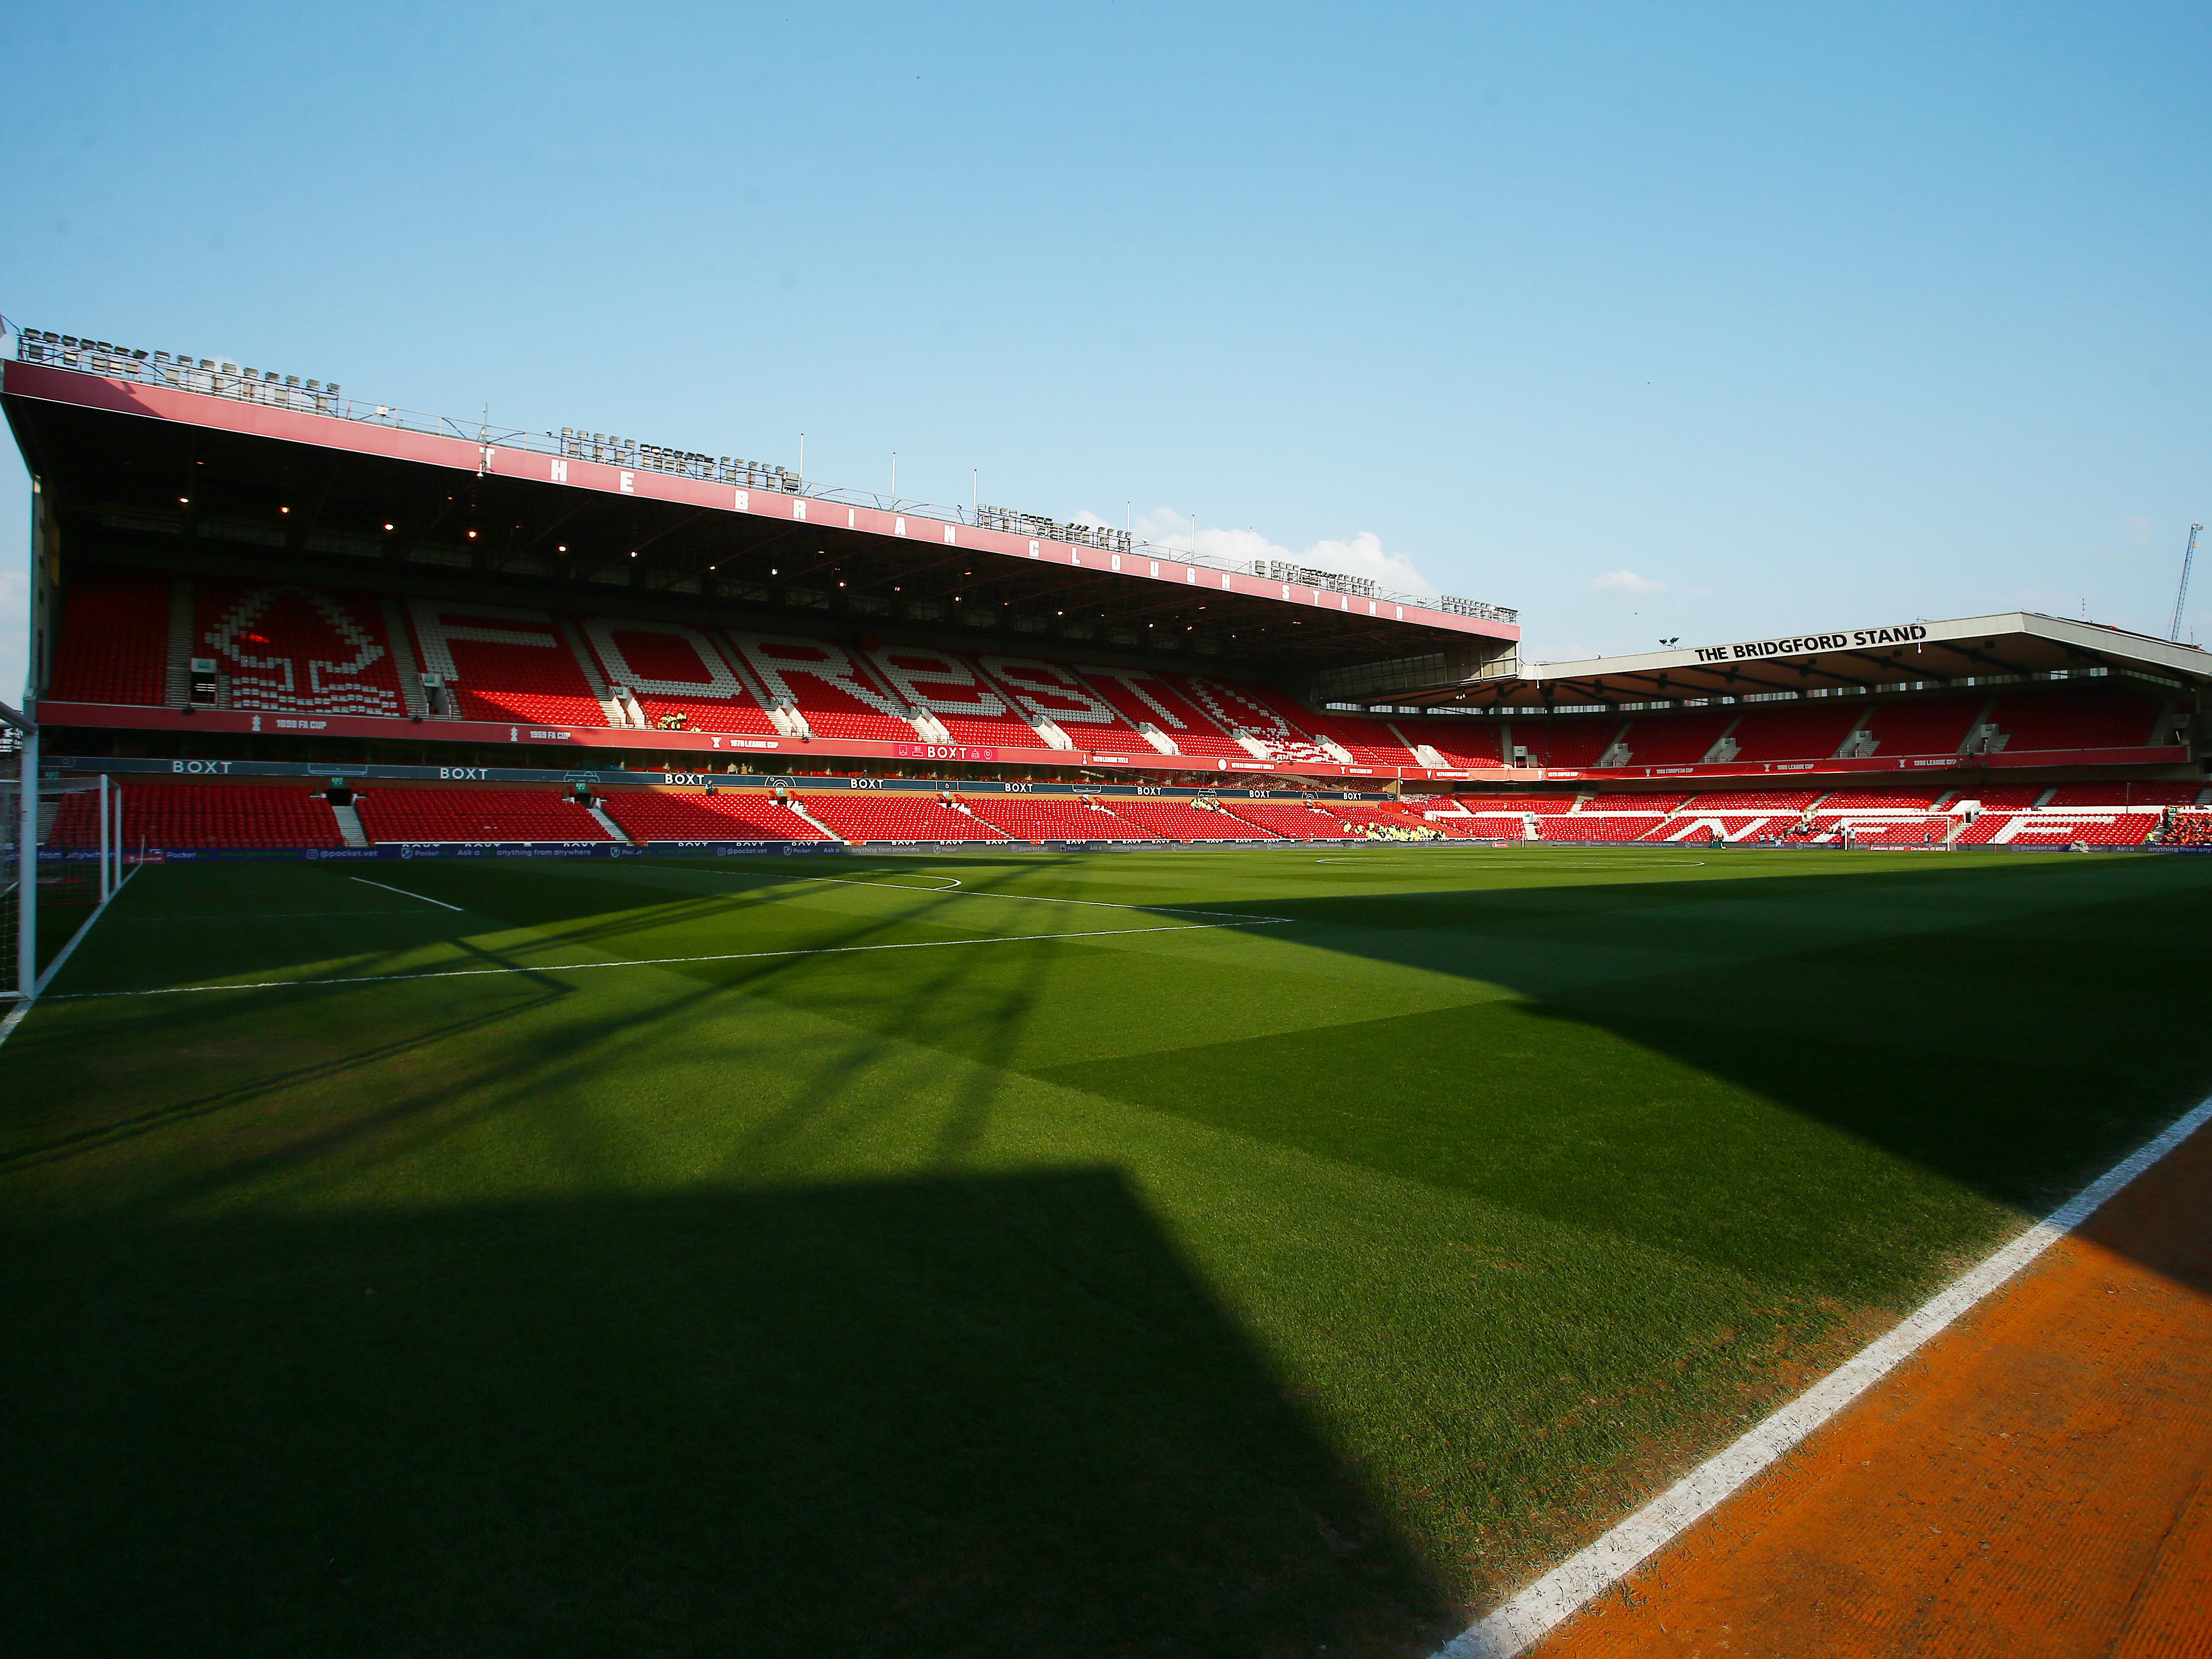 Forest fixture chosen for live TV coverage